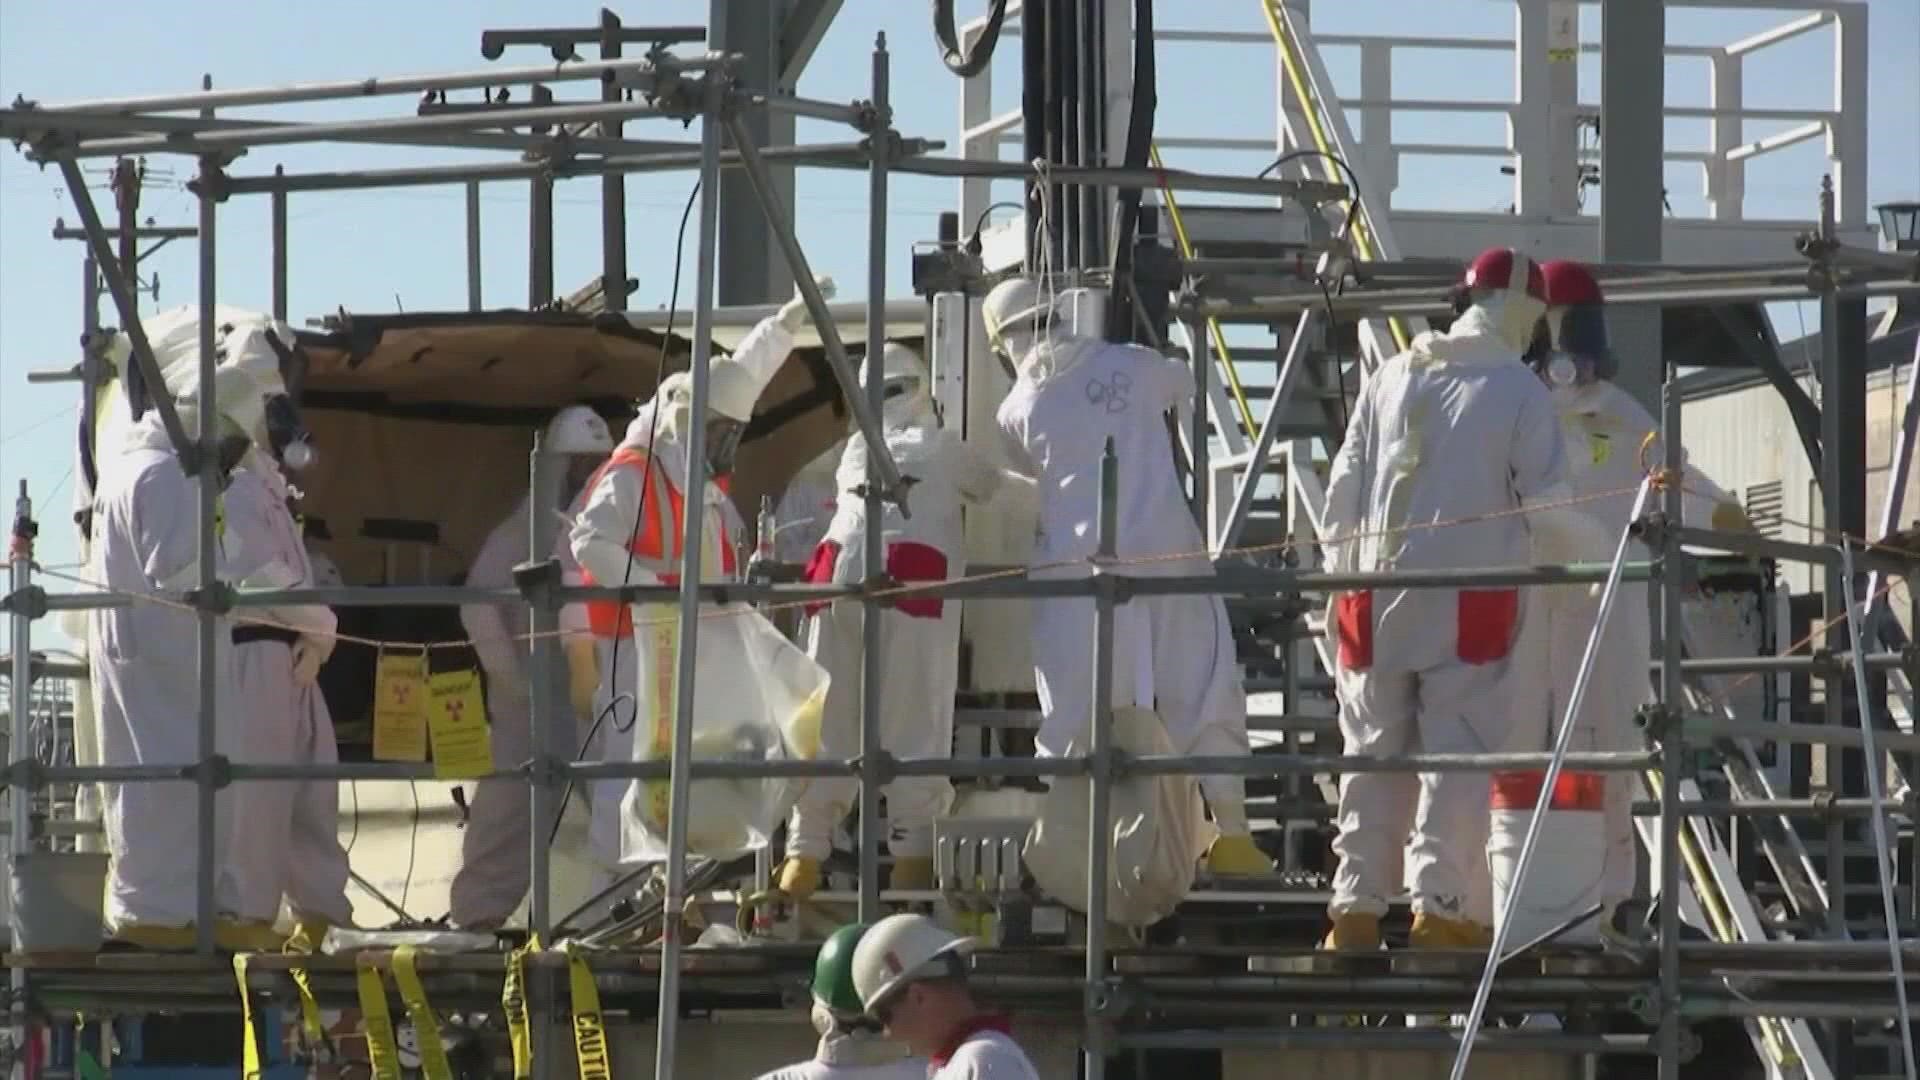 Washington Attorney General Bob Ferguson said the new protections apply to all individuals, including state employees who work on the Hanford Site.